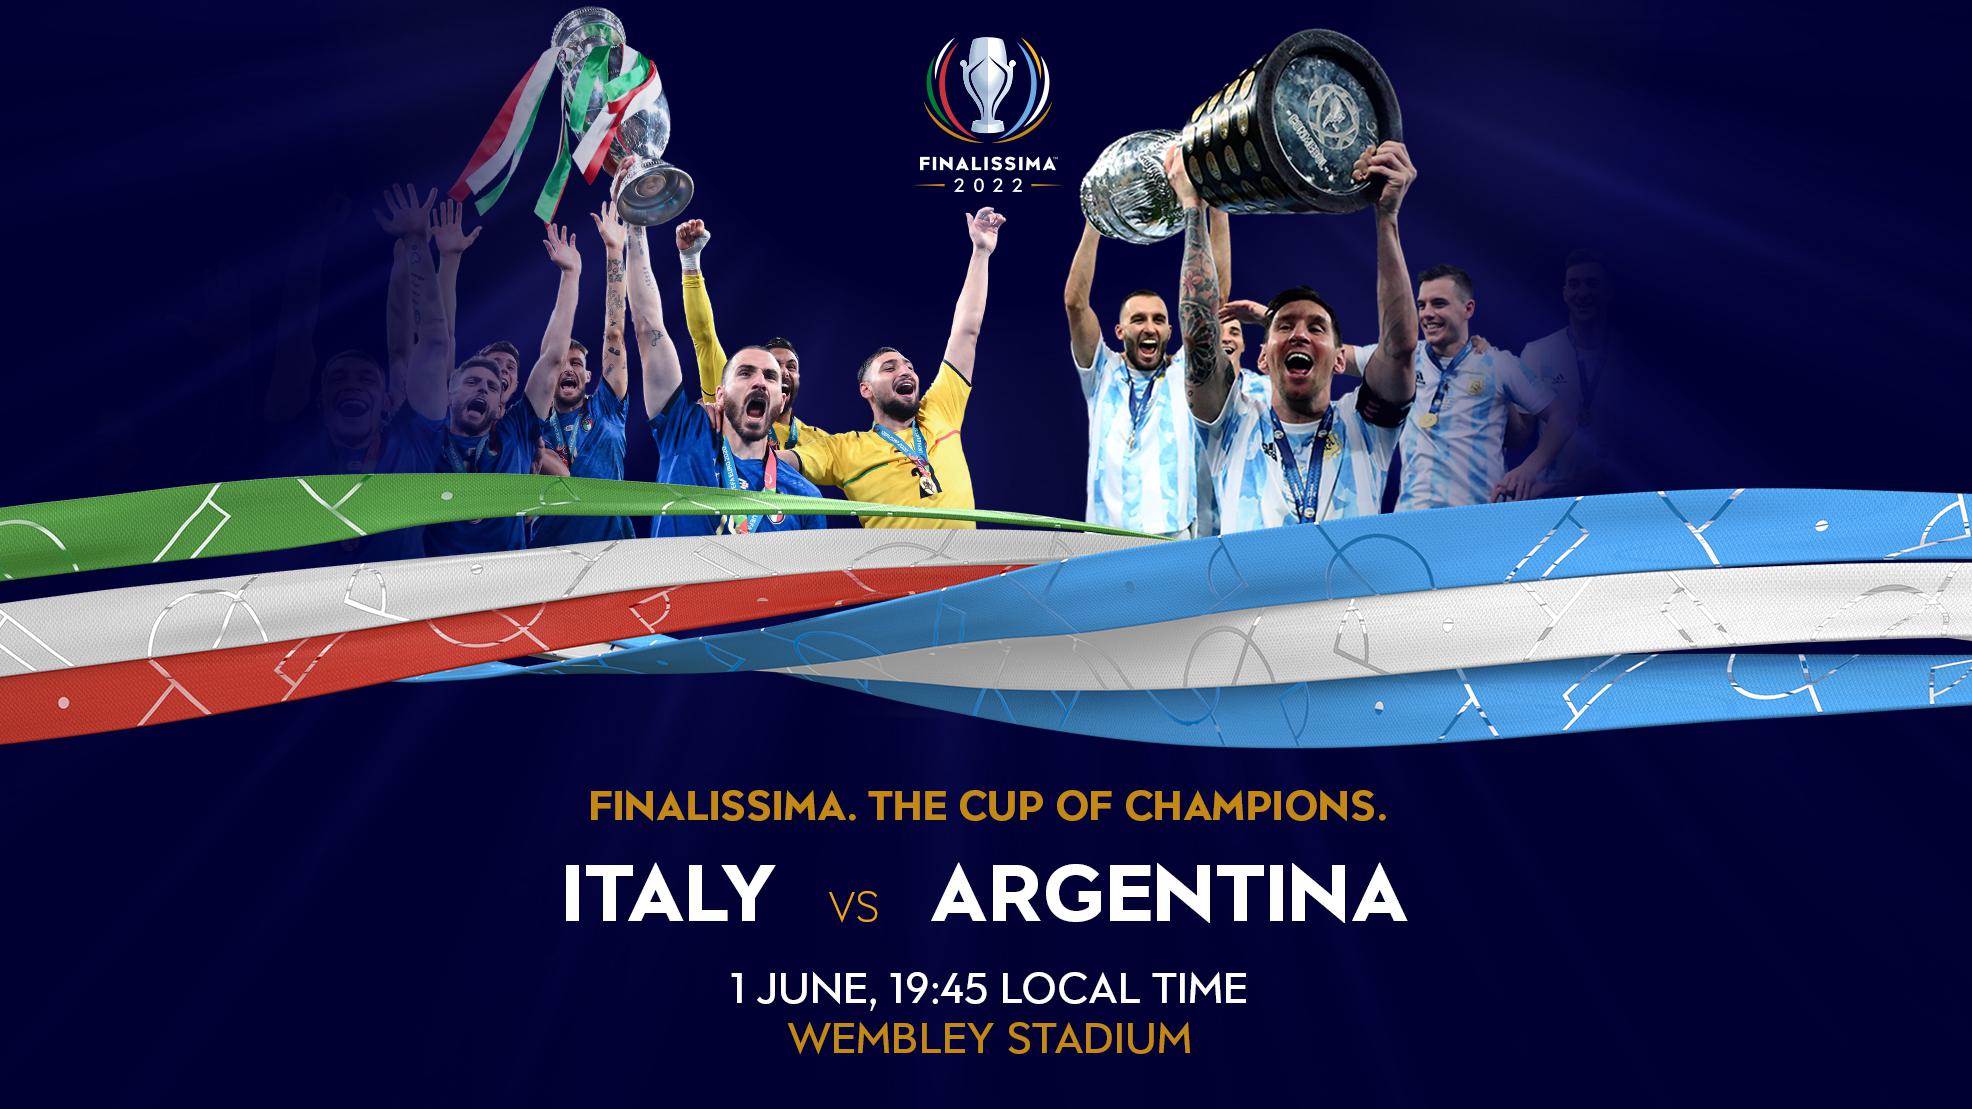 Finalissima 2022 tickets sold out: Wembley to host Italy vs Argentina |  Finalissima | UEFA.com